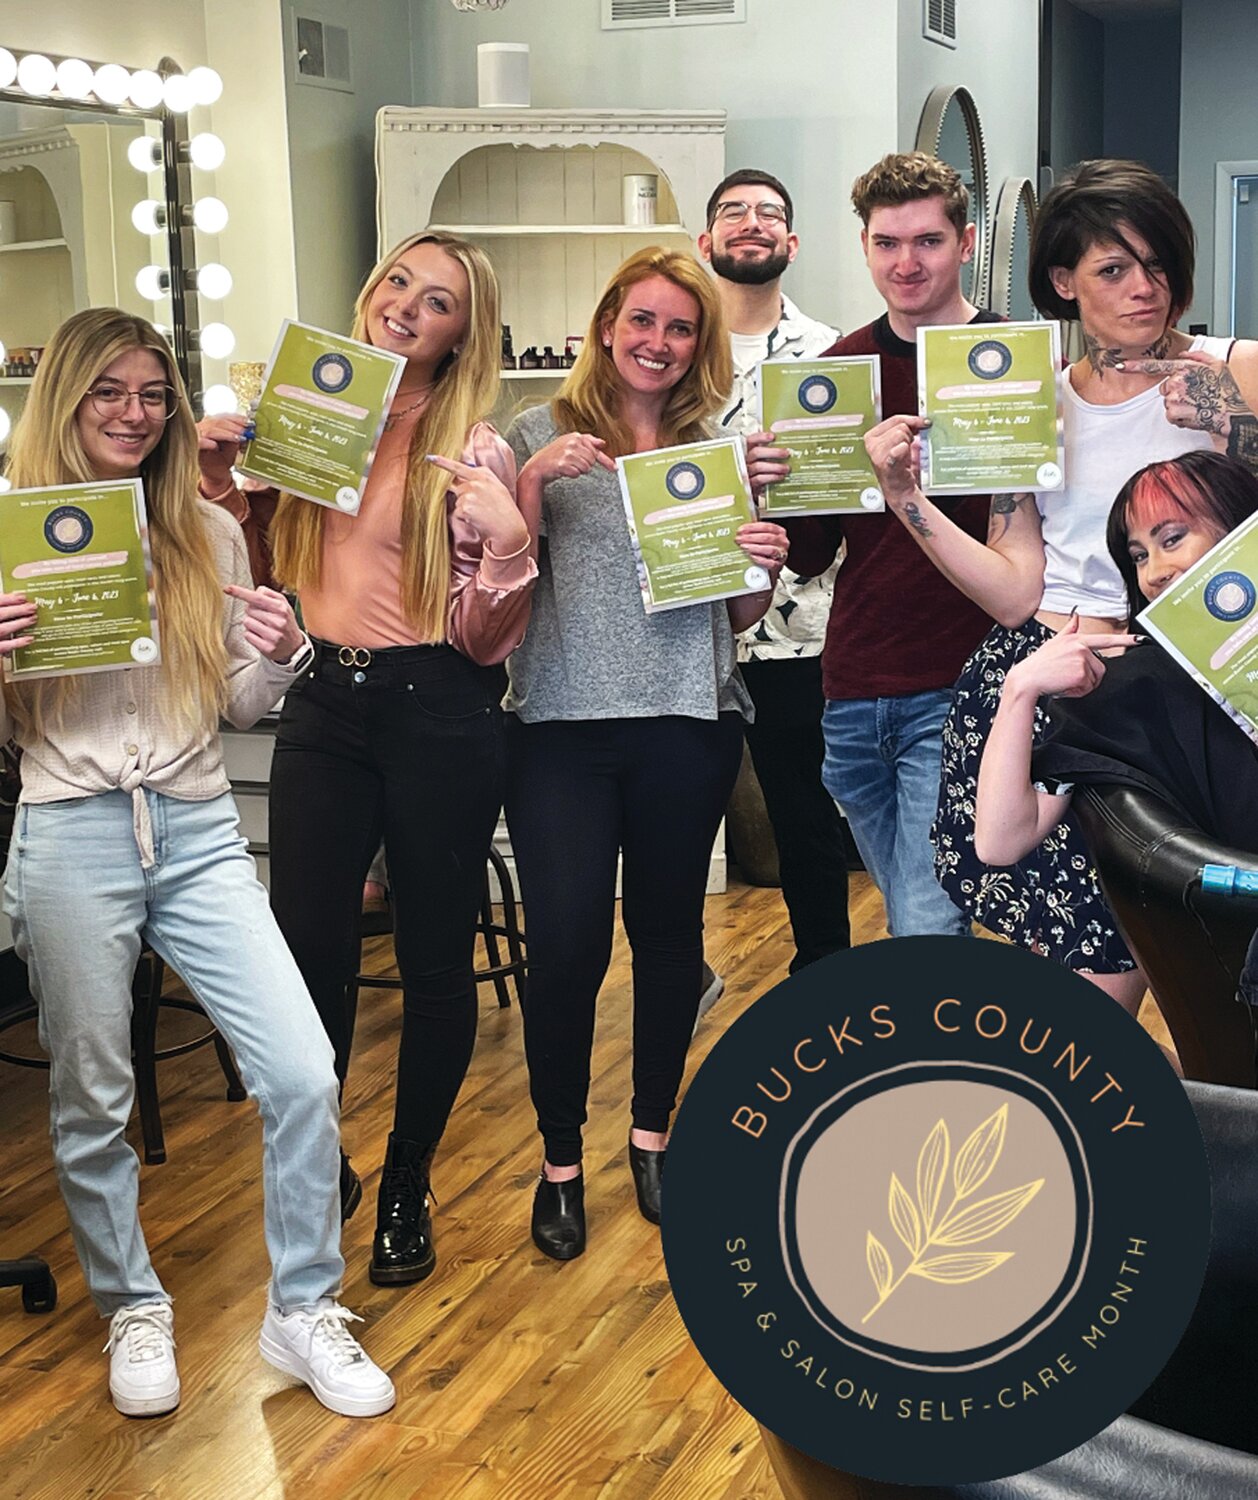 Posh Hair Design is one of the 40 locations from across Bucks County participating in the Bucks County Spa and Salon Self-Care Month, to benefit Kin Wellness and Support Center.